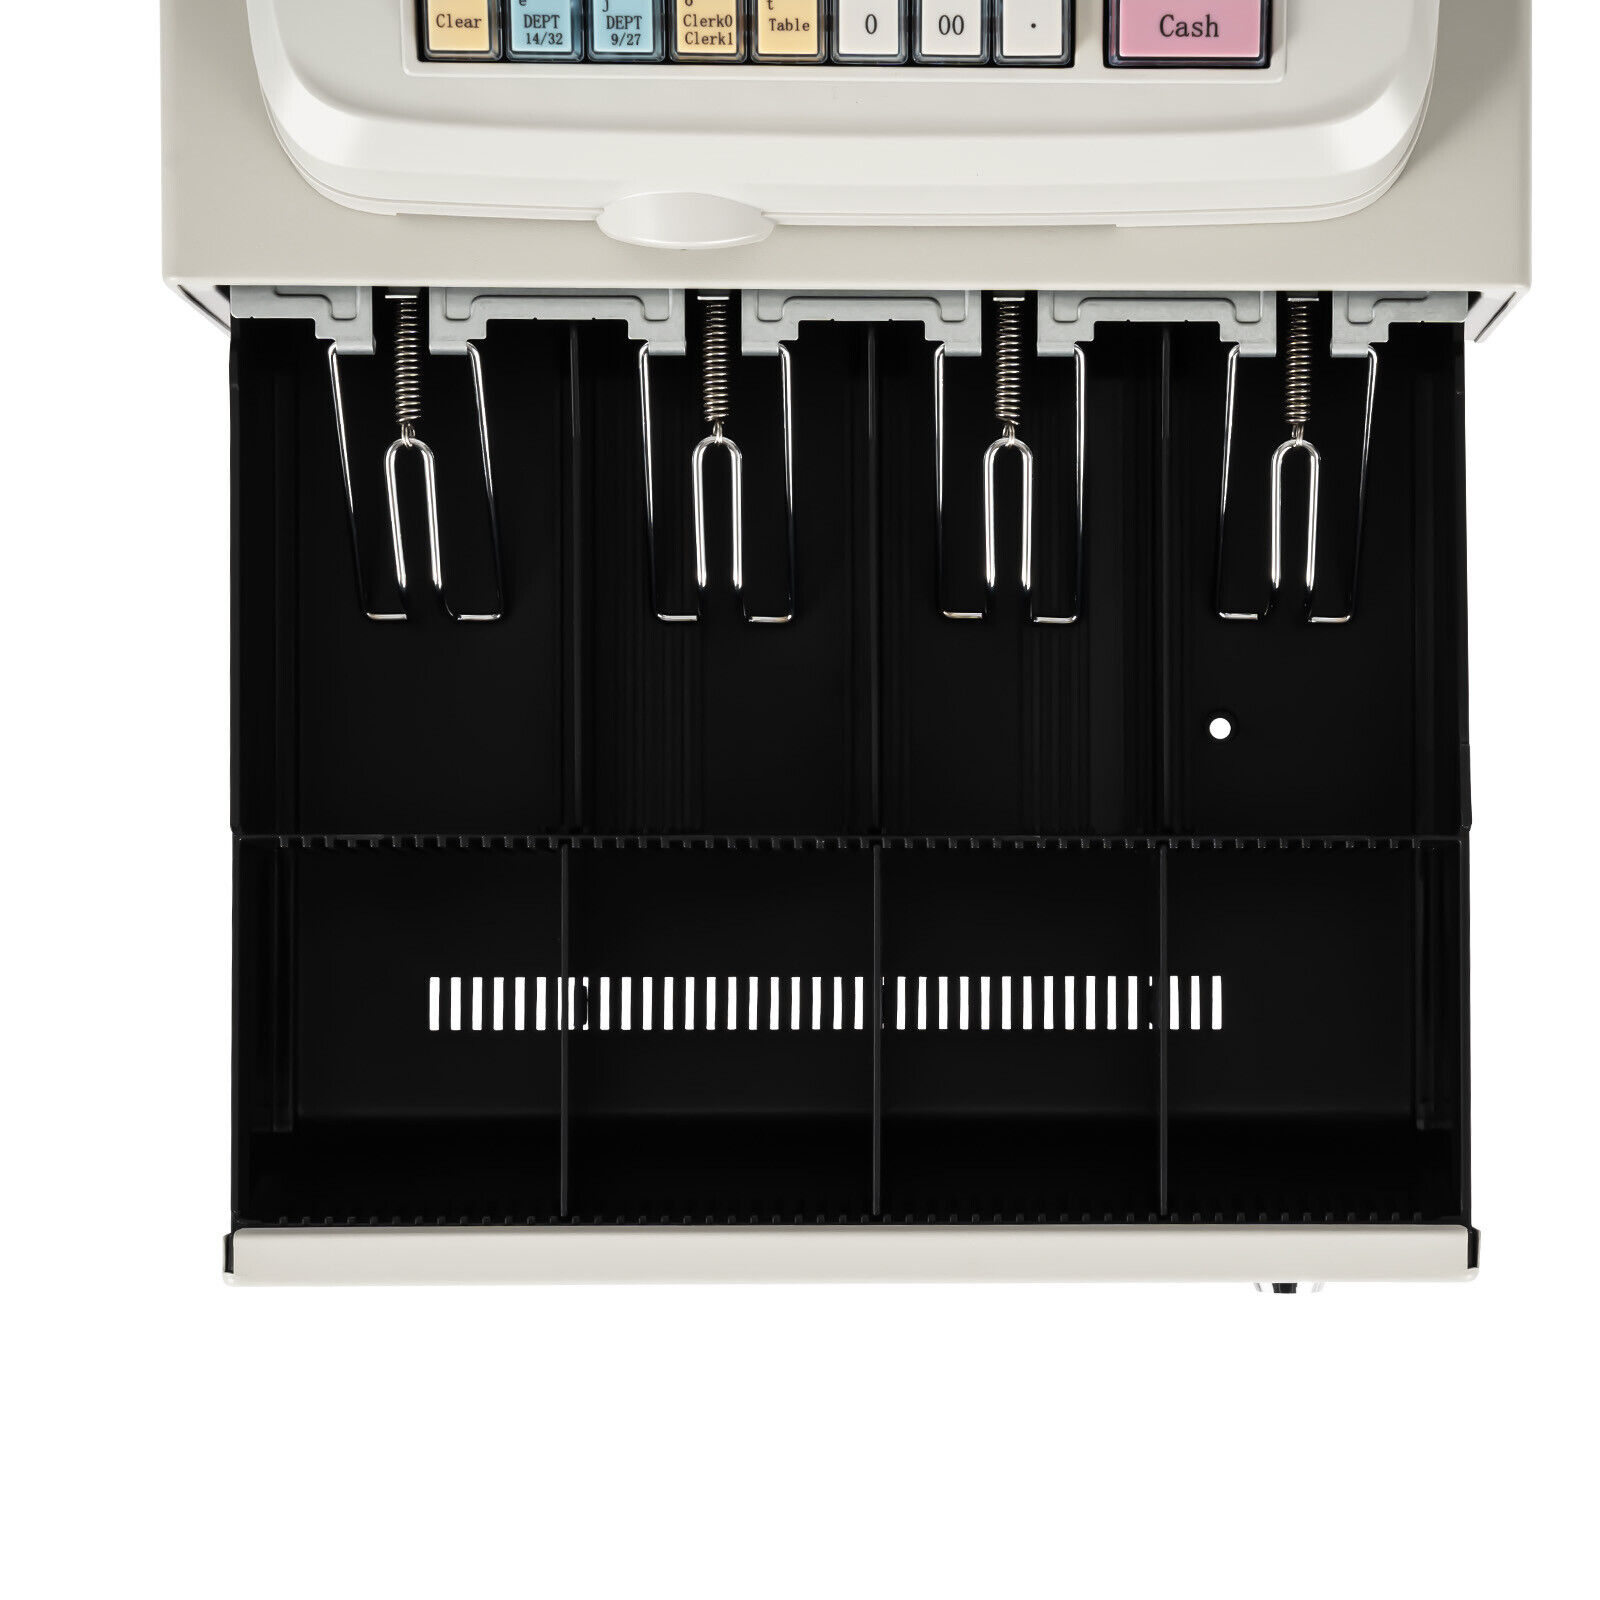 New Digital LED Cash Register with Drawer 48 Keys for Retail Restaurant POS SALE TBvechi Does Not Apply - фотография #10